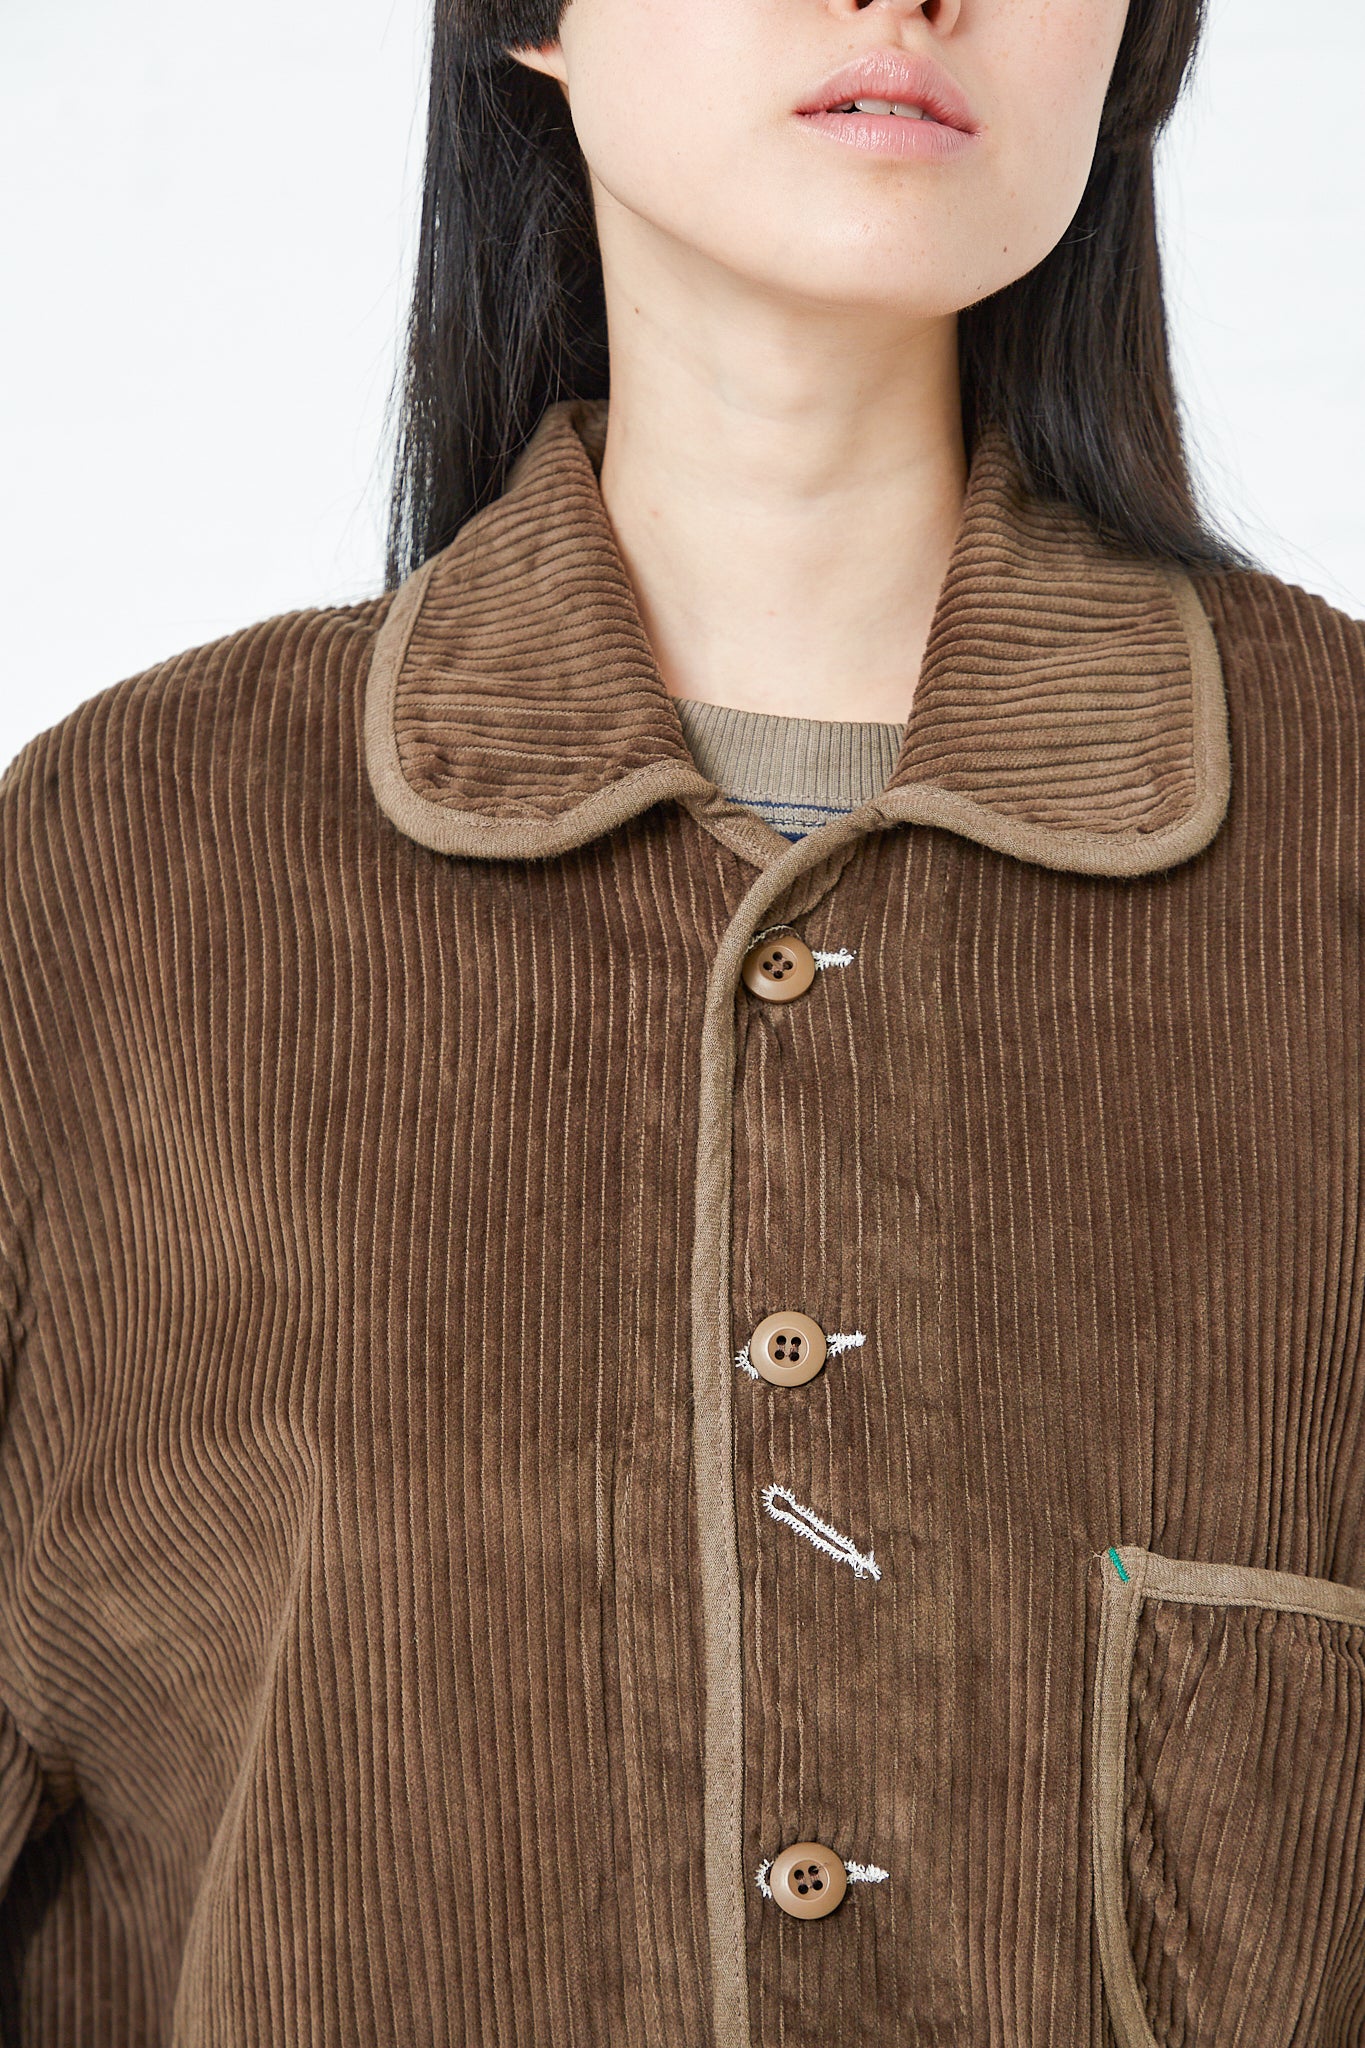 A woman wearing a vintage-inspired Big Wales Corduroy Cunningham Jacket in Grey Volcano by Dr. Collectors with button closure. Up close view.